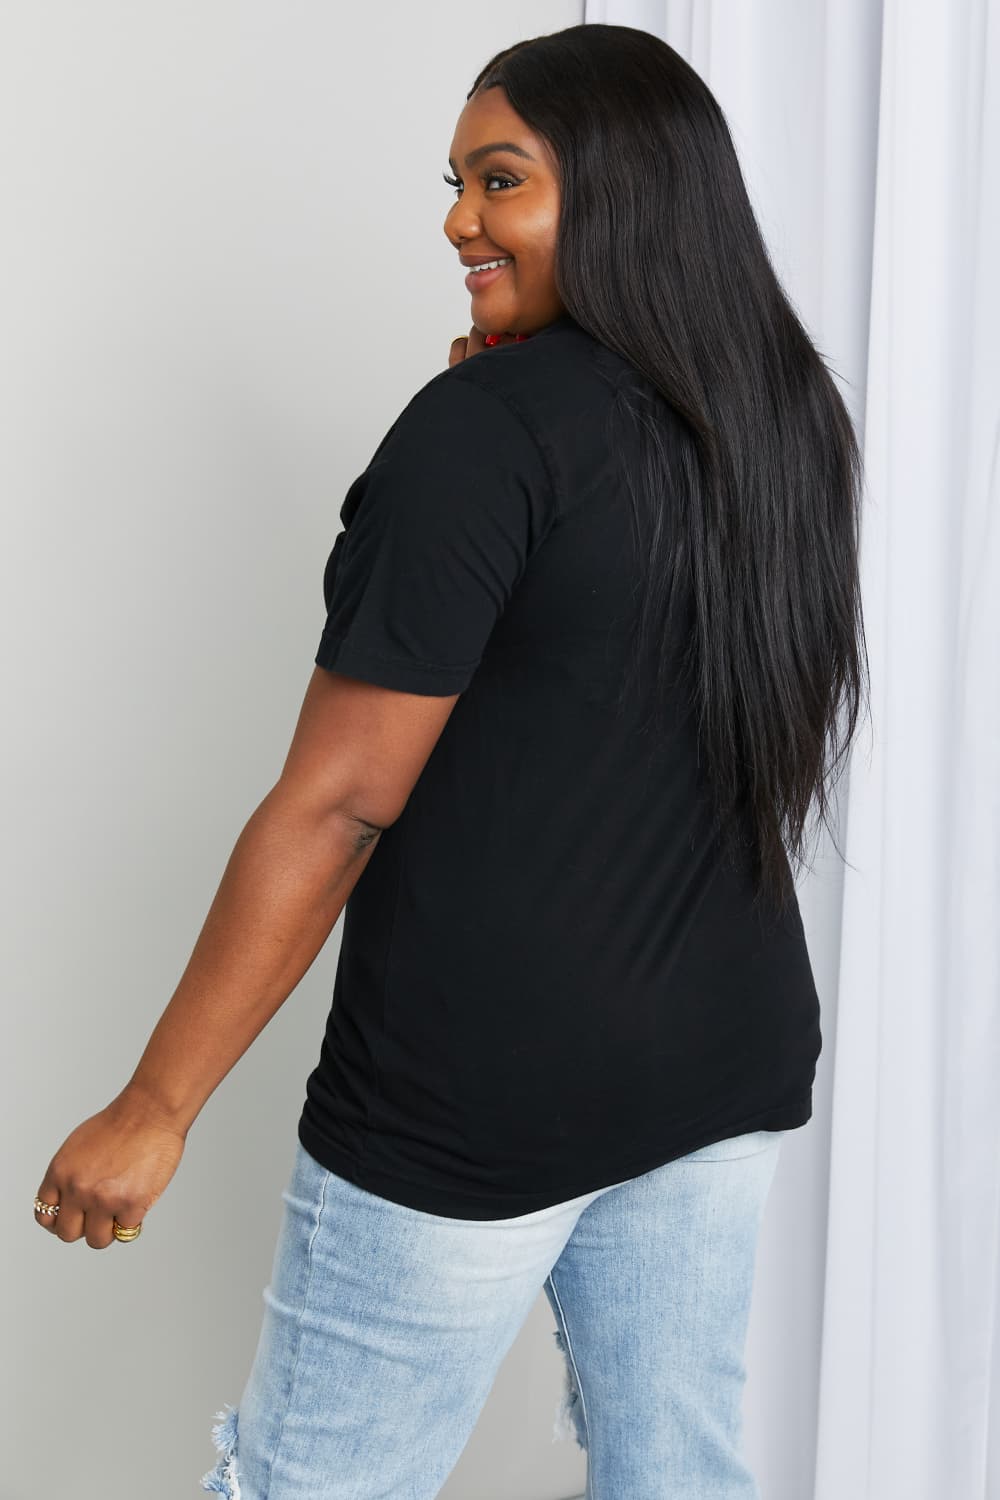 Black Simply Love Full Size Heart Graphic Cotton Tee